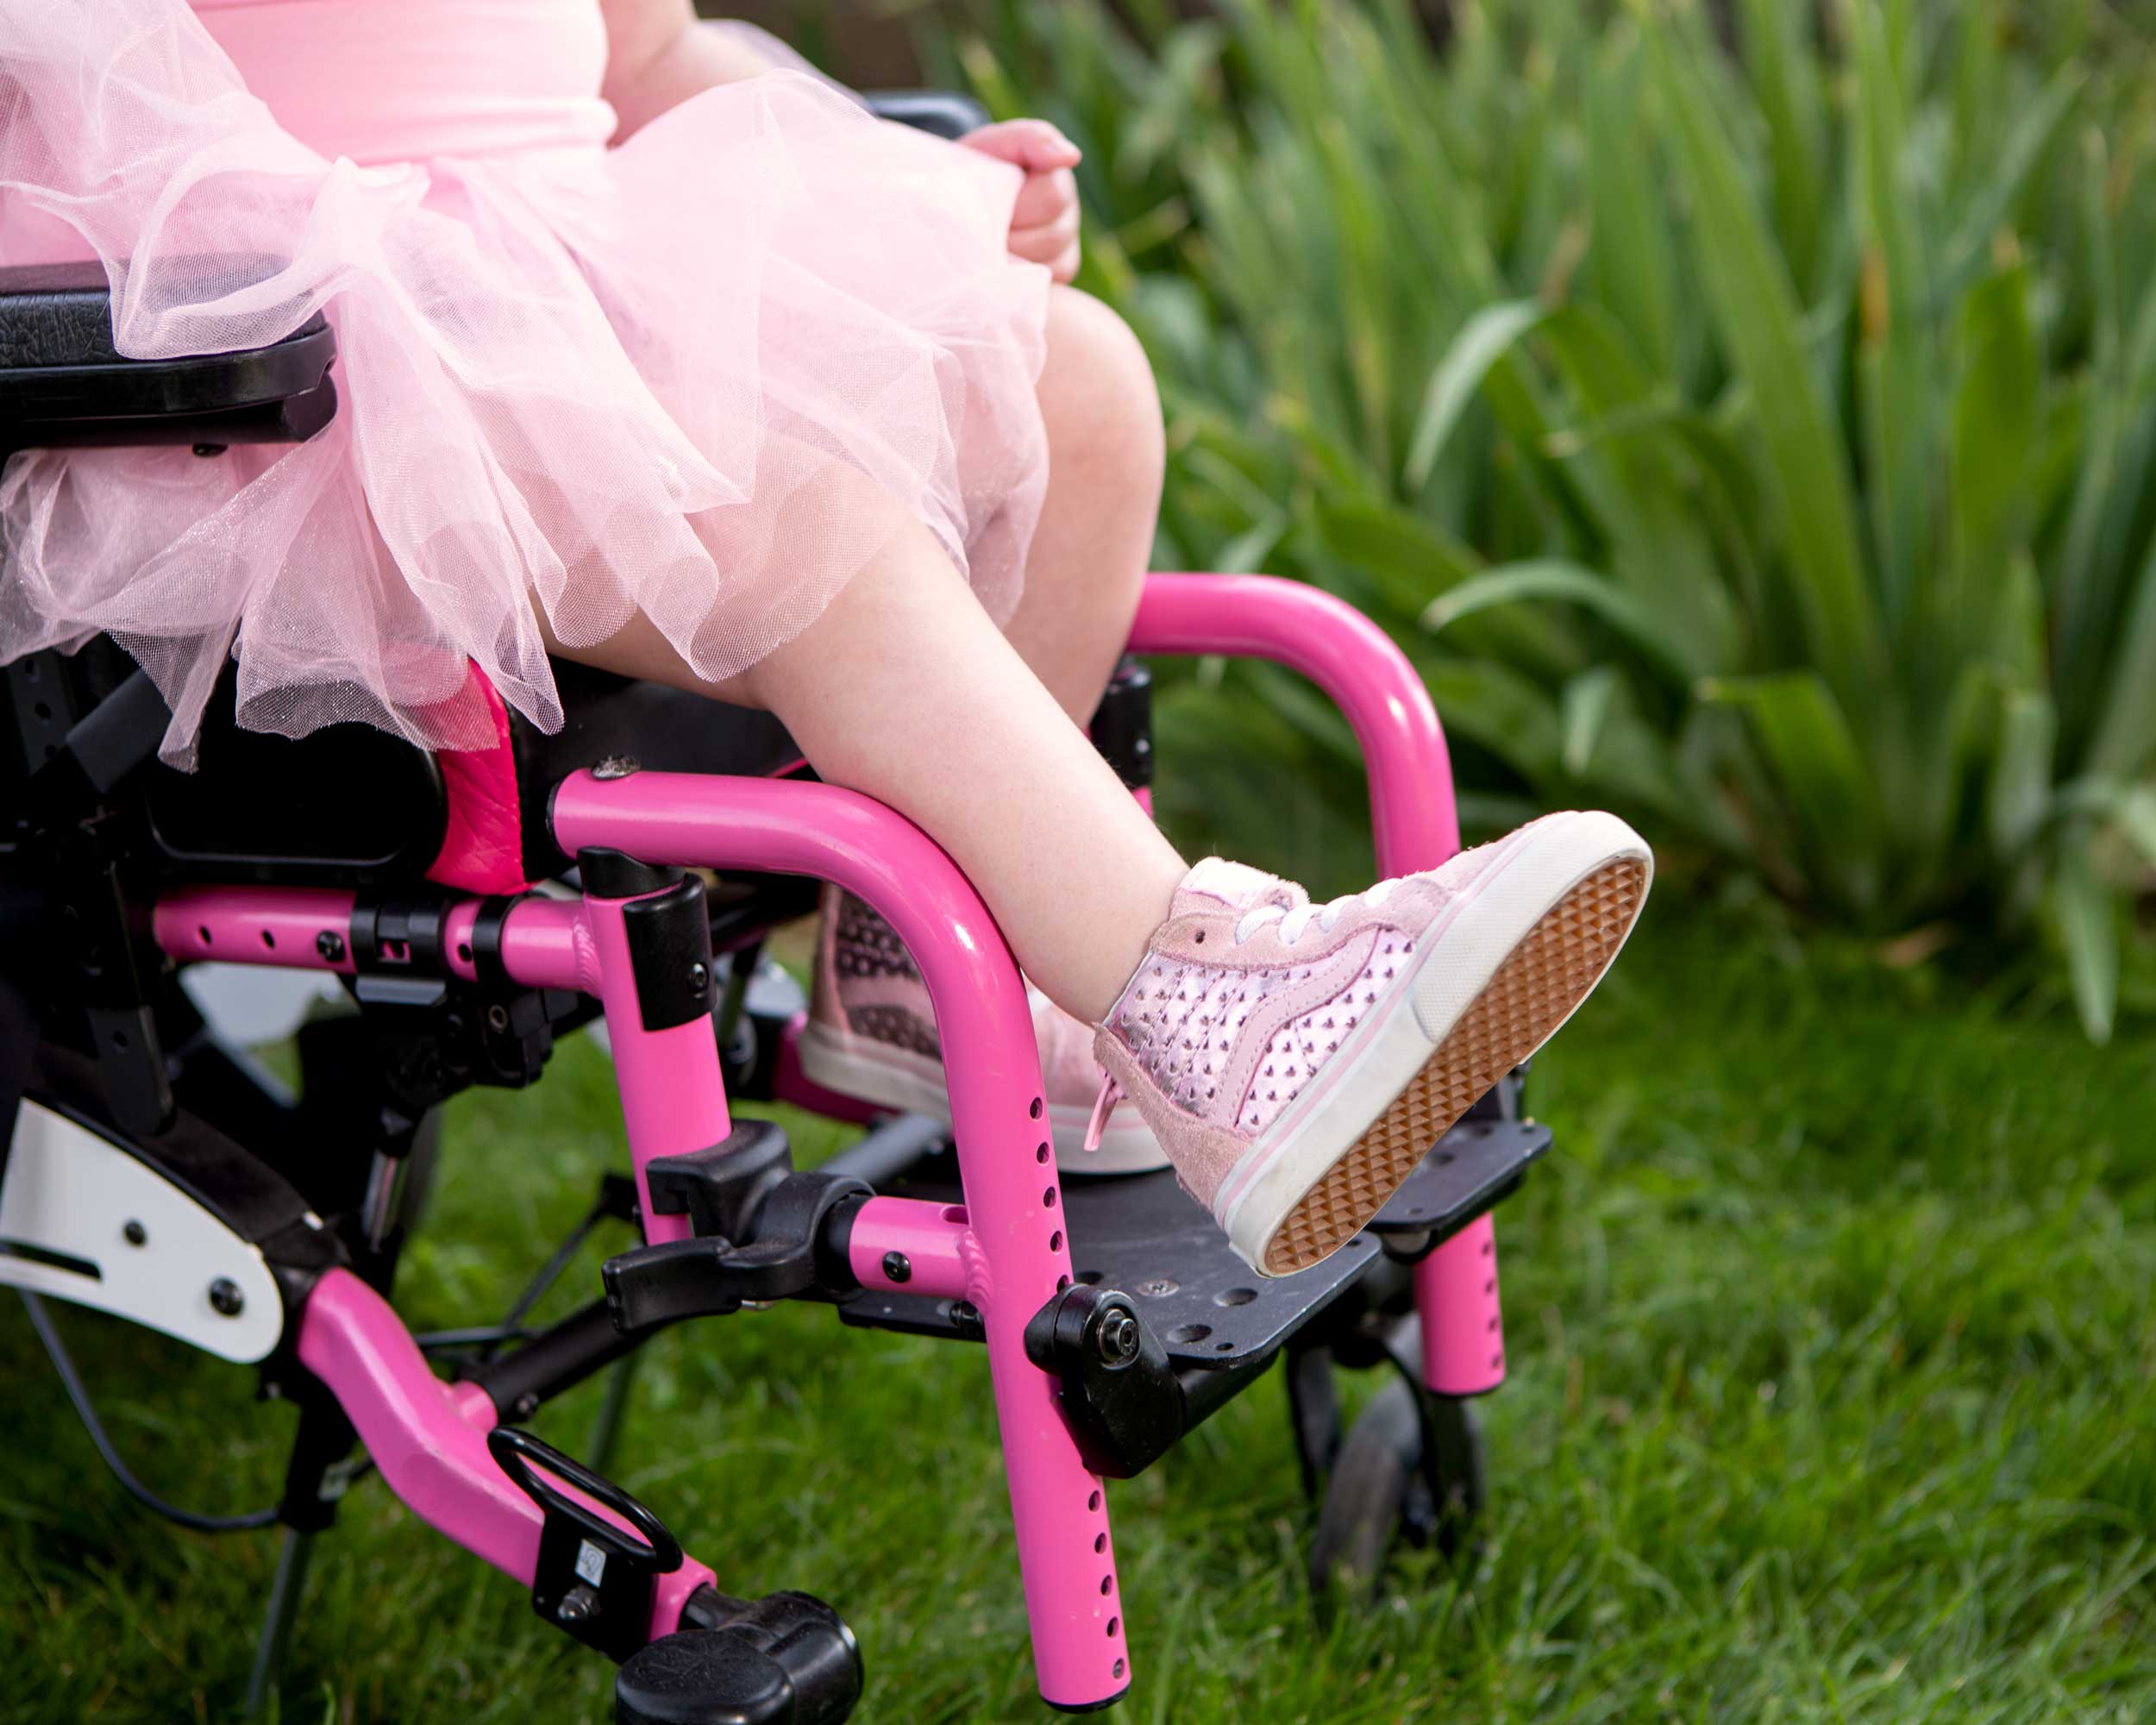 Young dancer in a tutu and pink wheelchair for brand photography.